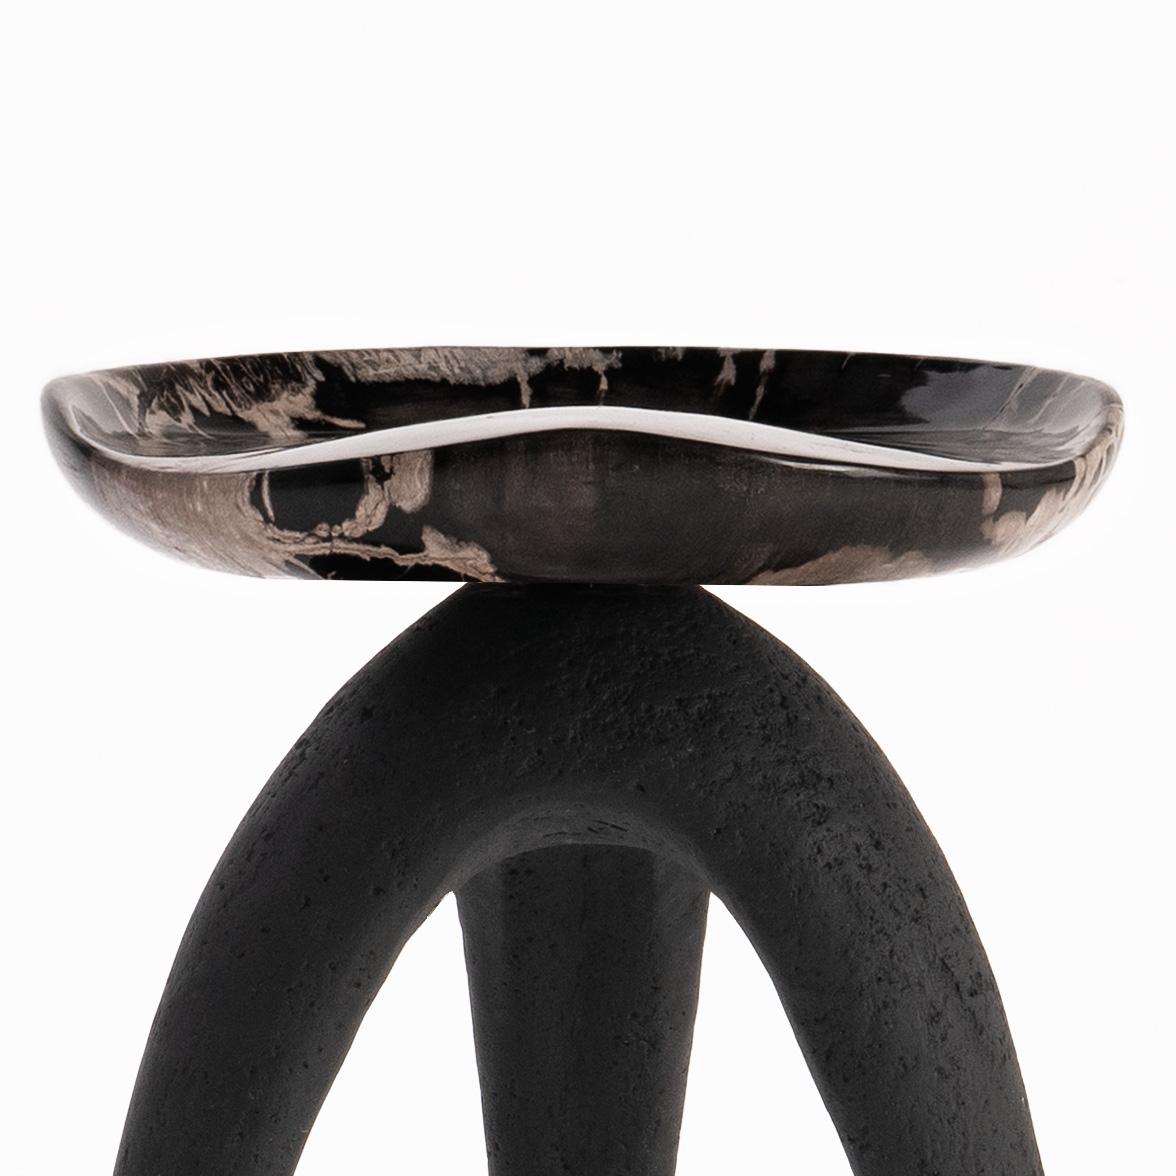 Australian Bermuda Triangle • Hand-Carved Solid Petrified Wood Stool by Odditi For Sale